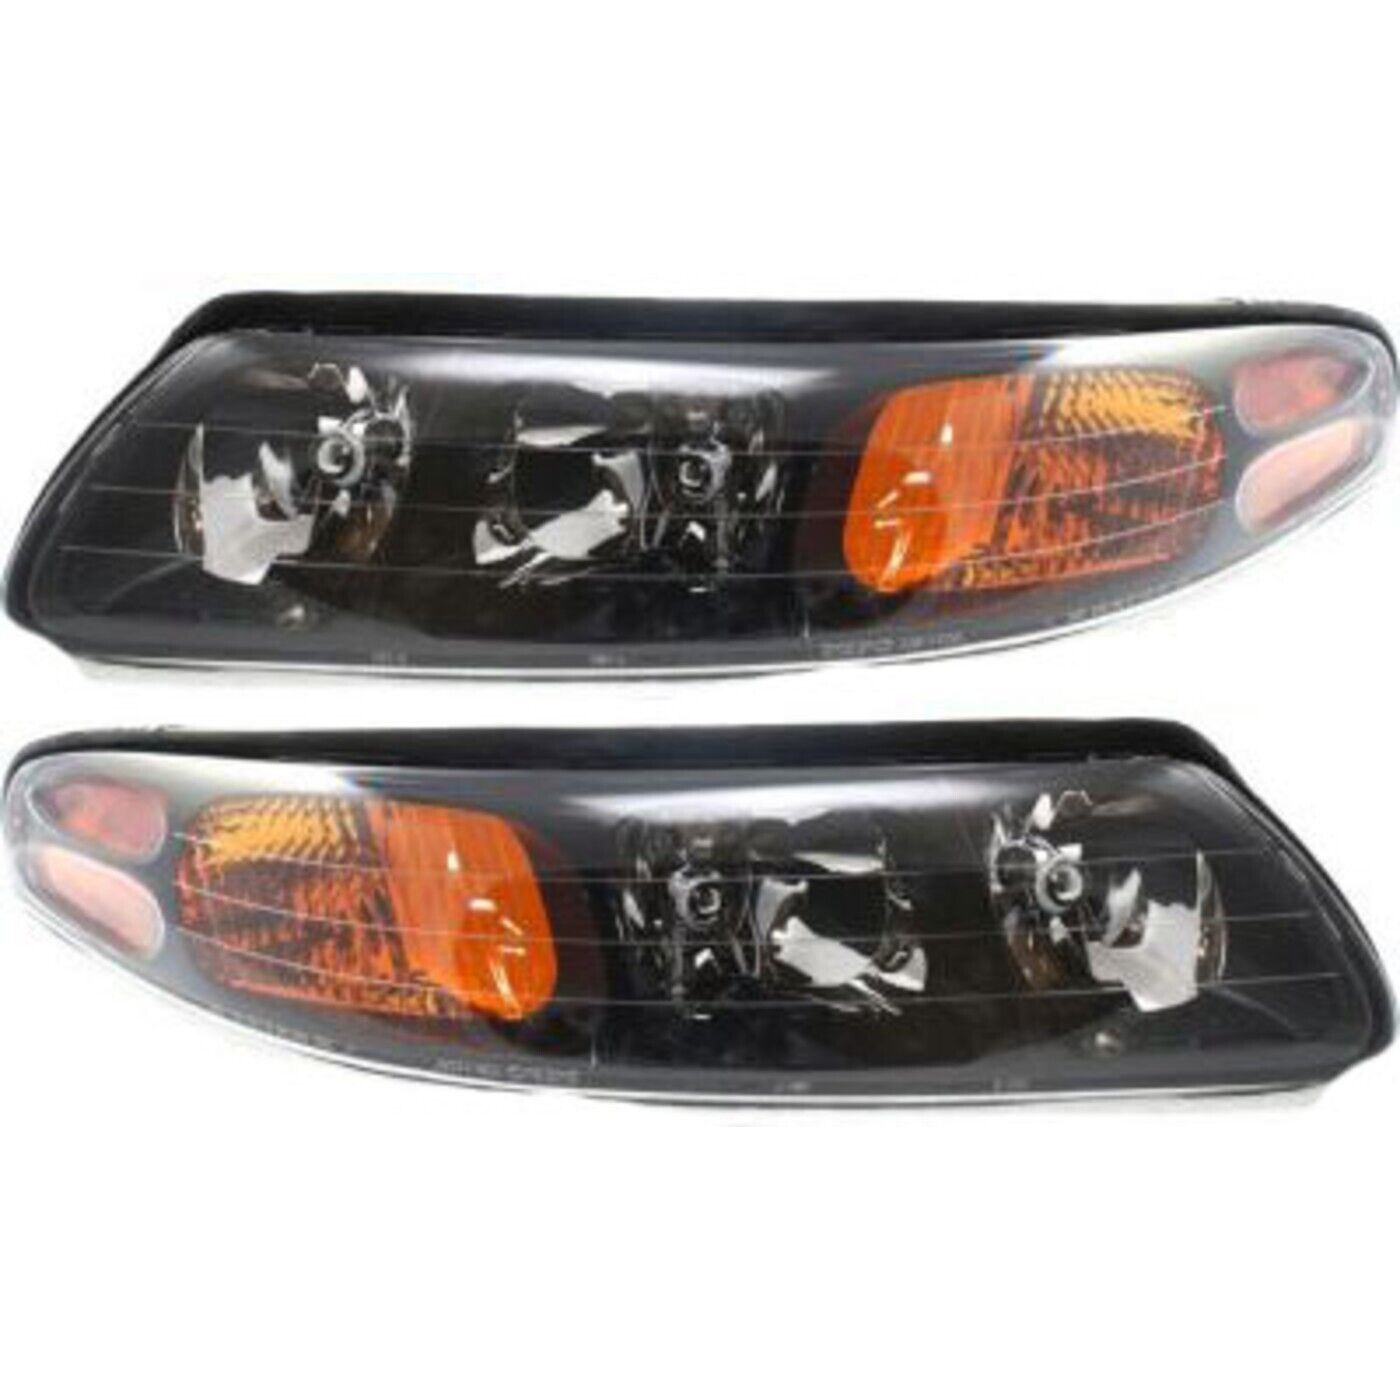 Headlight Assembly Set For 2000-2004 Pontiac Bonneville Left and Right With Bulb